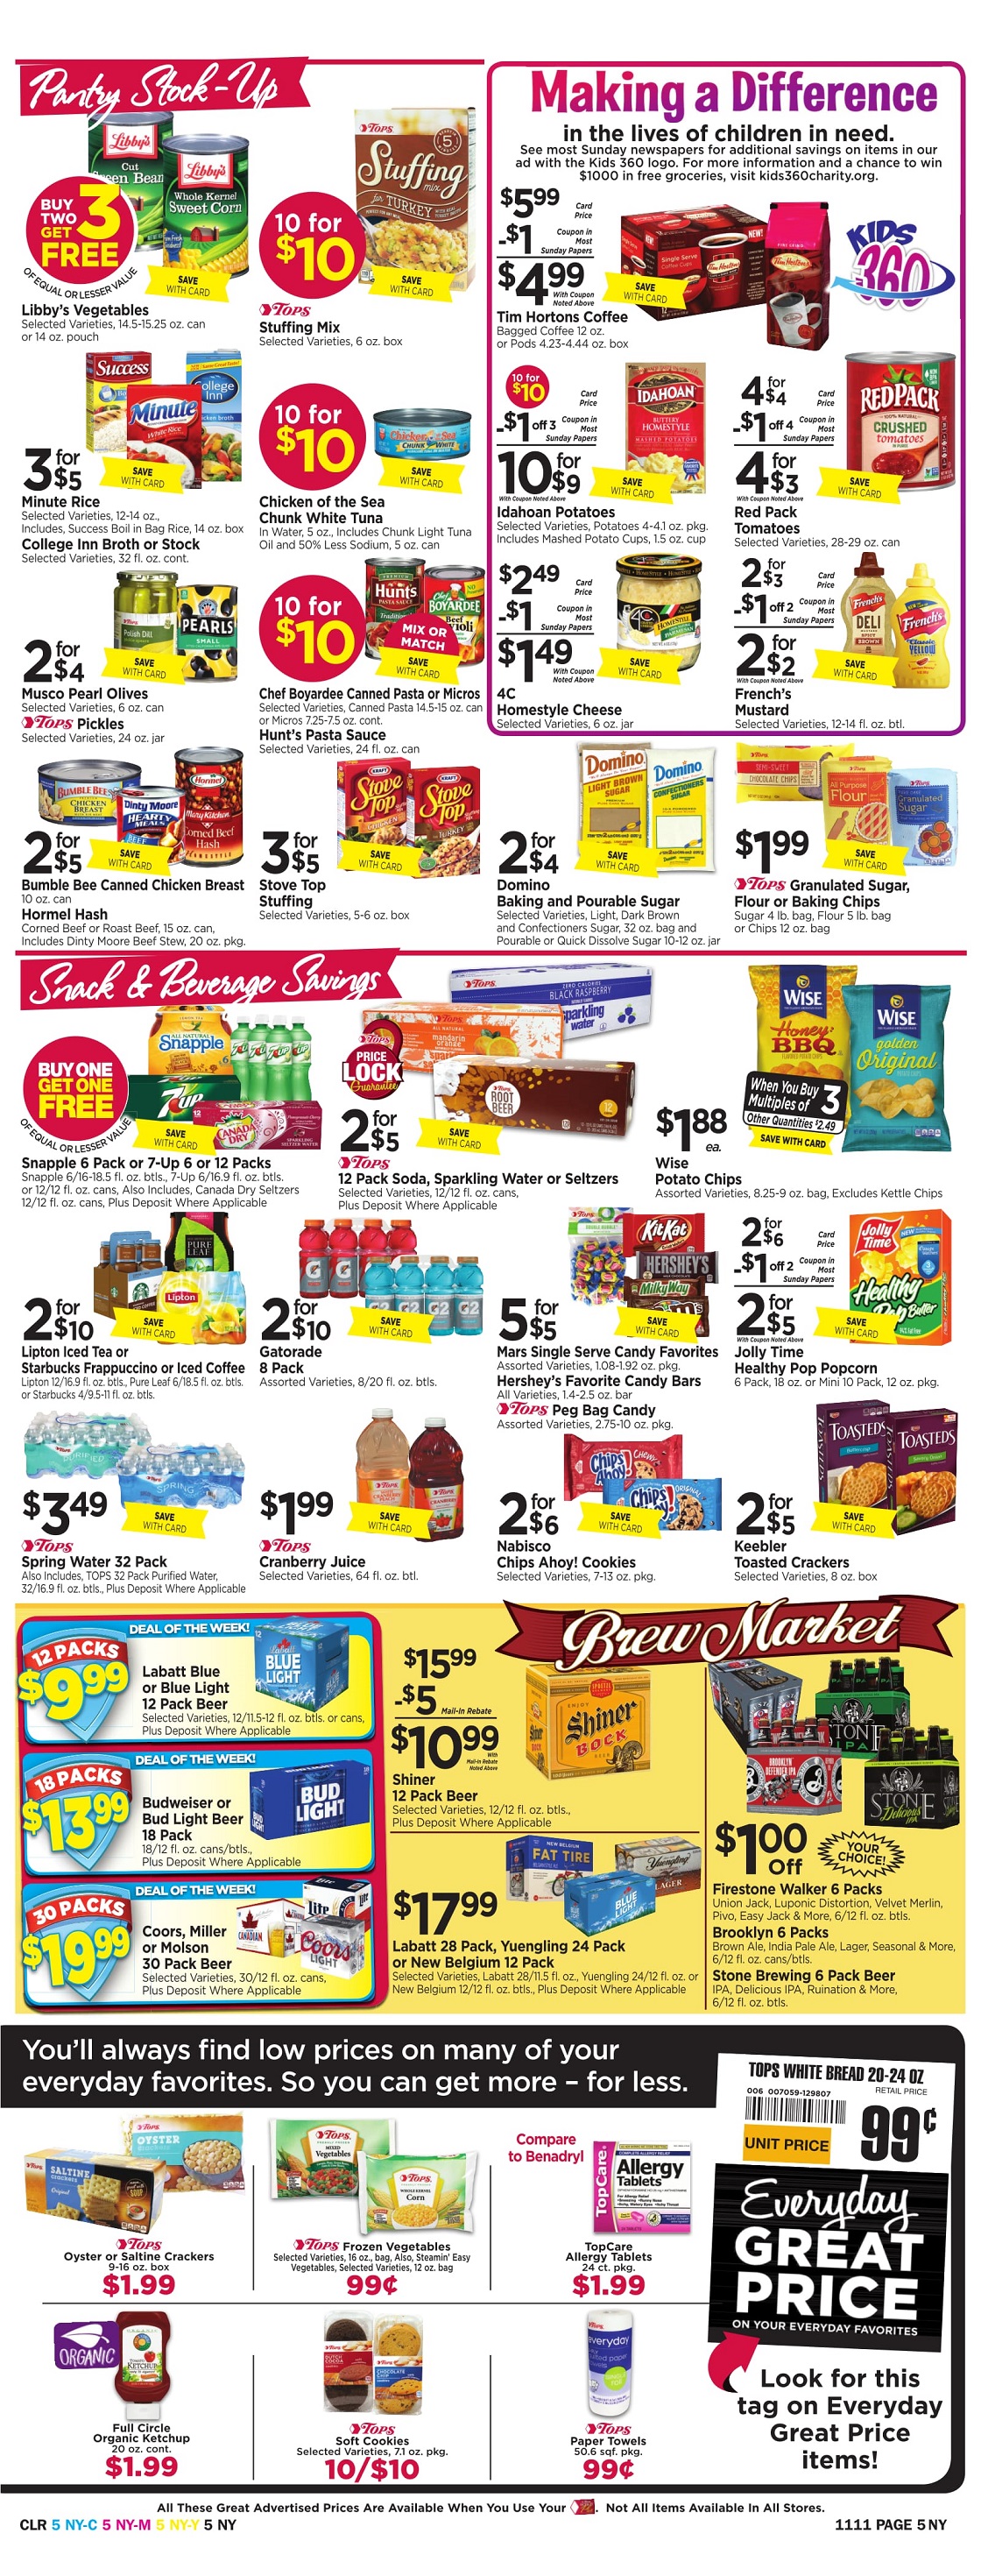 Tops Markets Ad Scan Week 11 5 Page 5